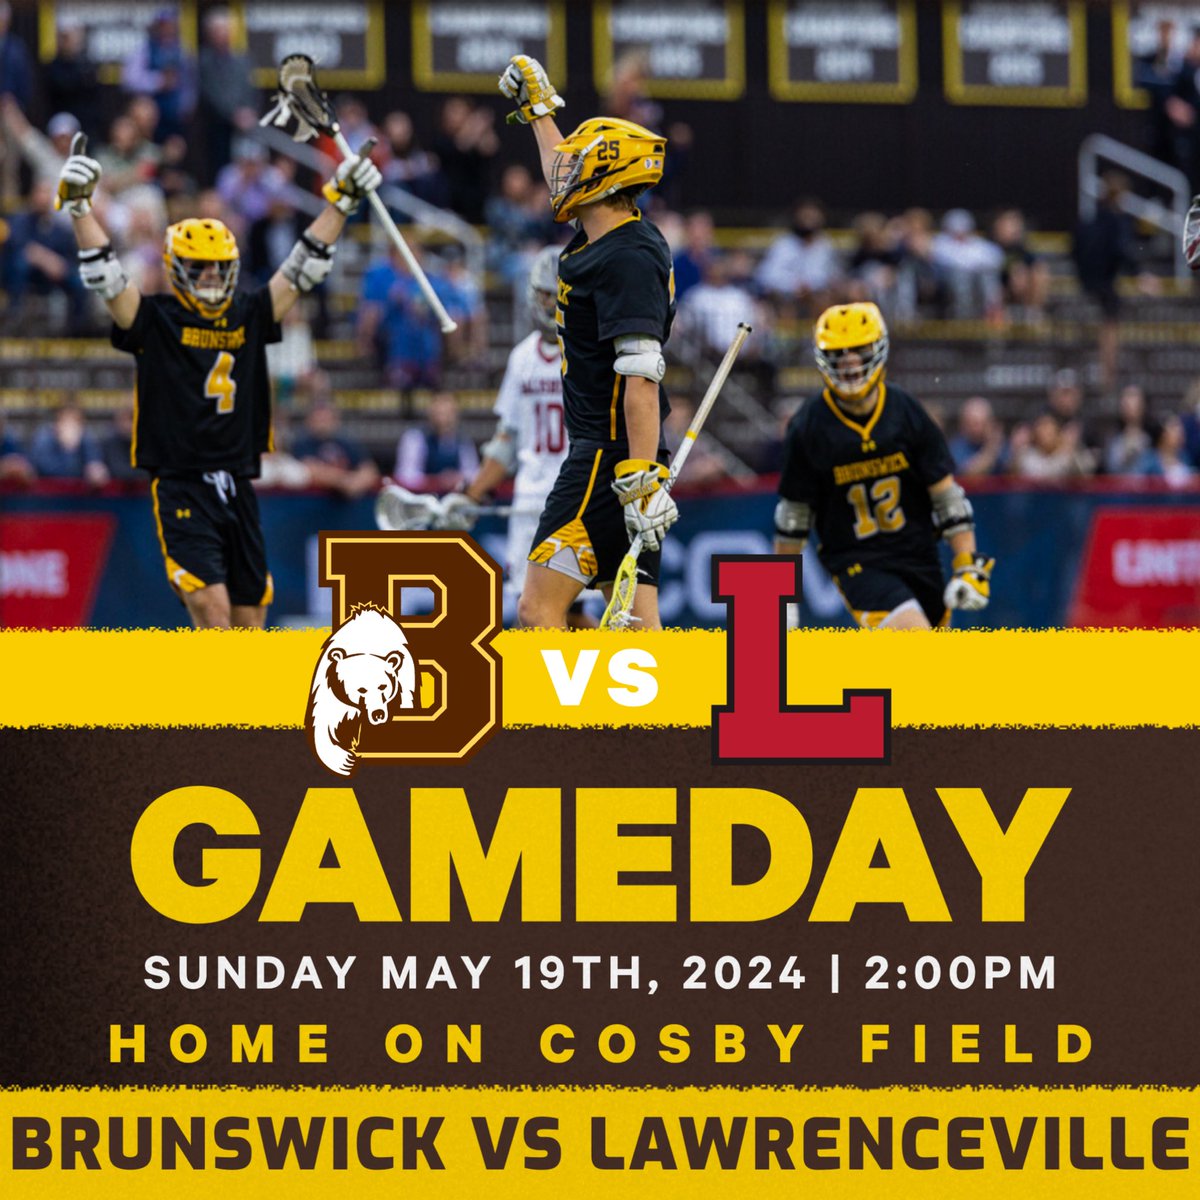 Prep Nationals Championship Game. Join us tomorrow at 2pm on Cosby Field to watch us battle vs Lawrenceville in the Finals 🐻🥍✊ #WickLax @lvilleblacrosse